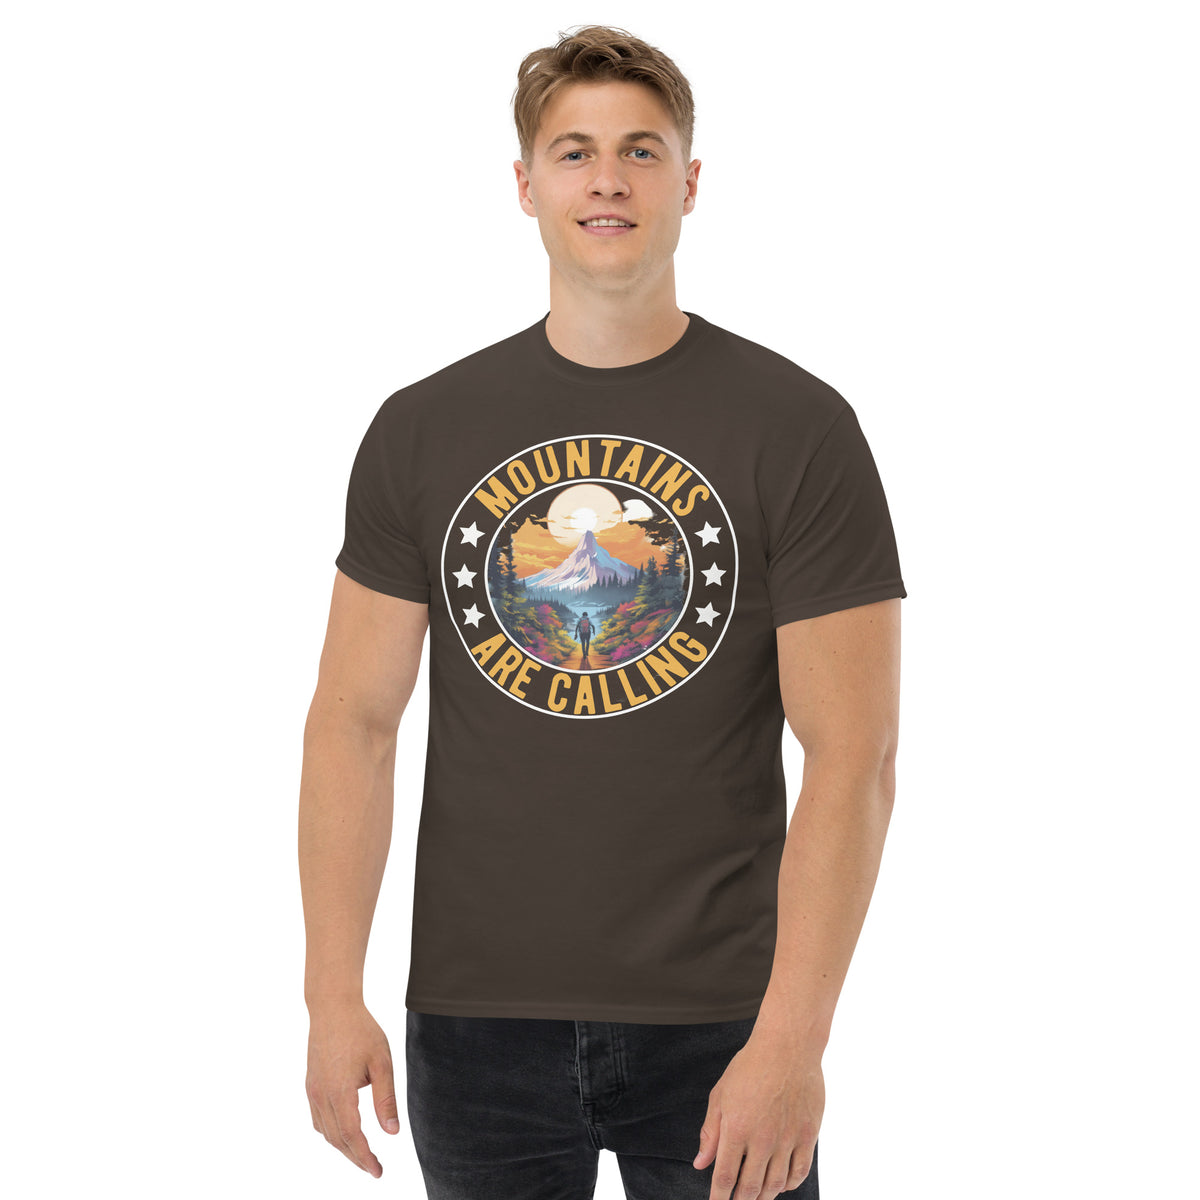 T-Shirt Outdoor & Wandern "Mountains are calling " Variante 5